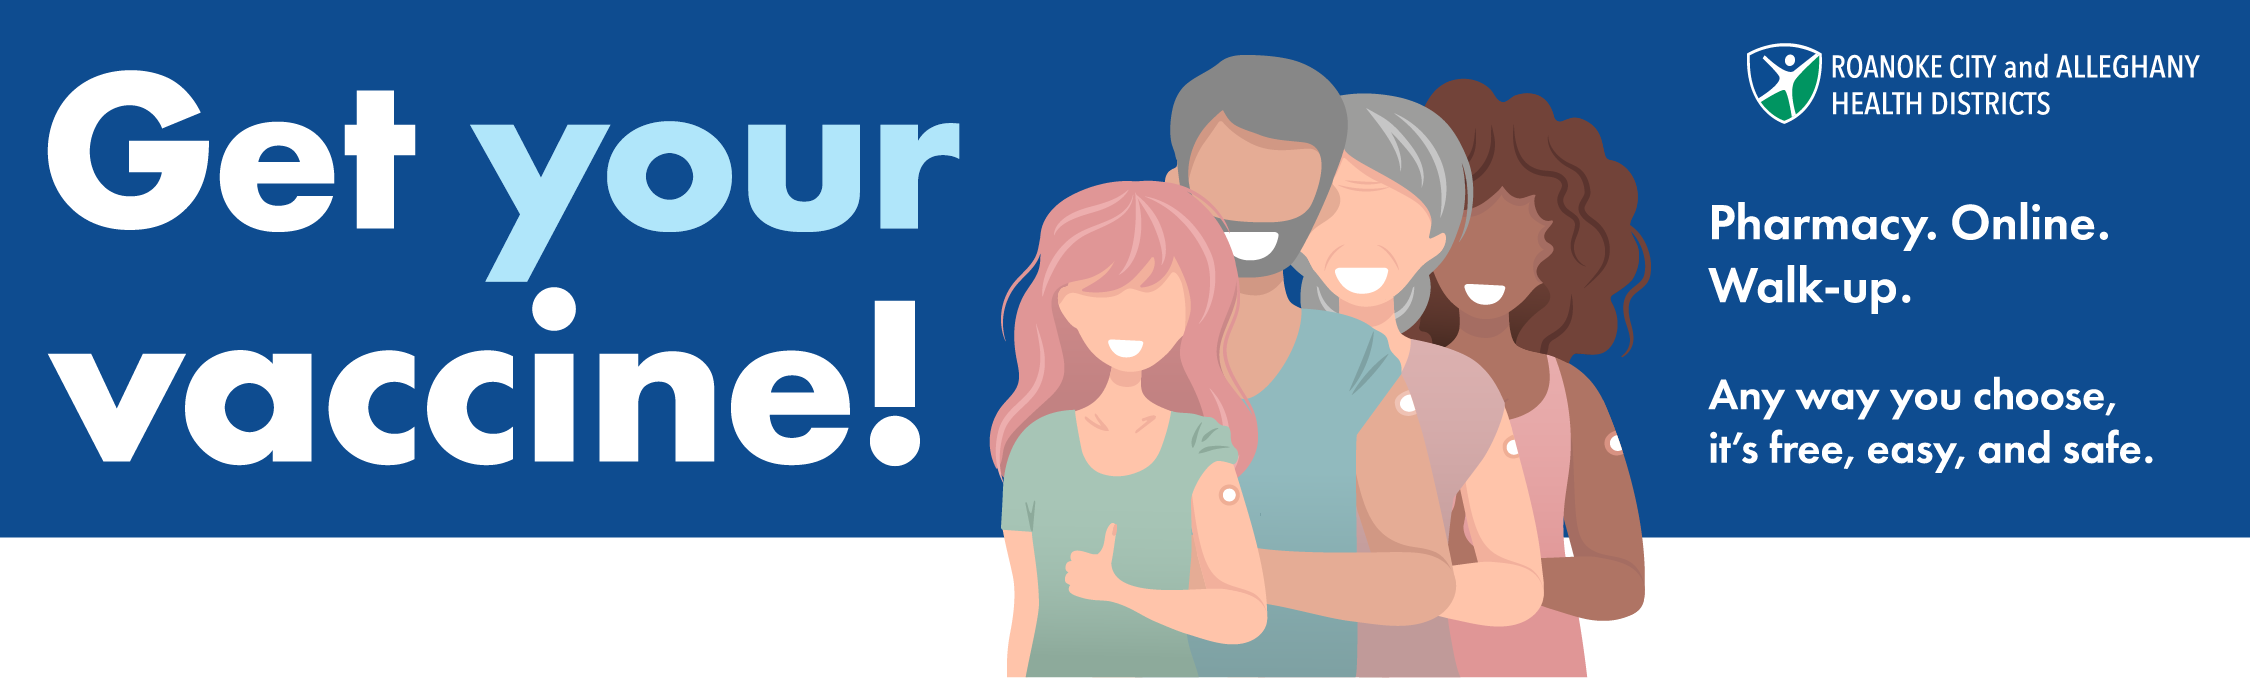 Get your vaccine! *illustration of a group of 4 vaccinated people giving a thumps up* *Roanoke City and Alleghany Health Districts Logo* Pharmacy. Online. Walk-up. Any way you choose it's free, easy, and safe.